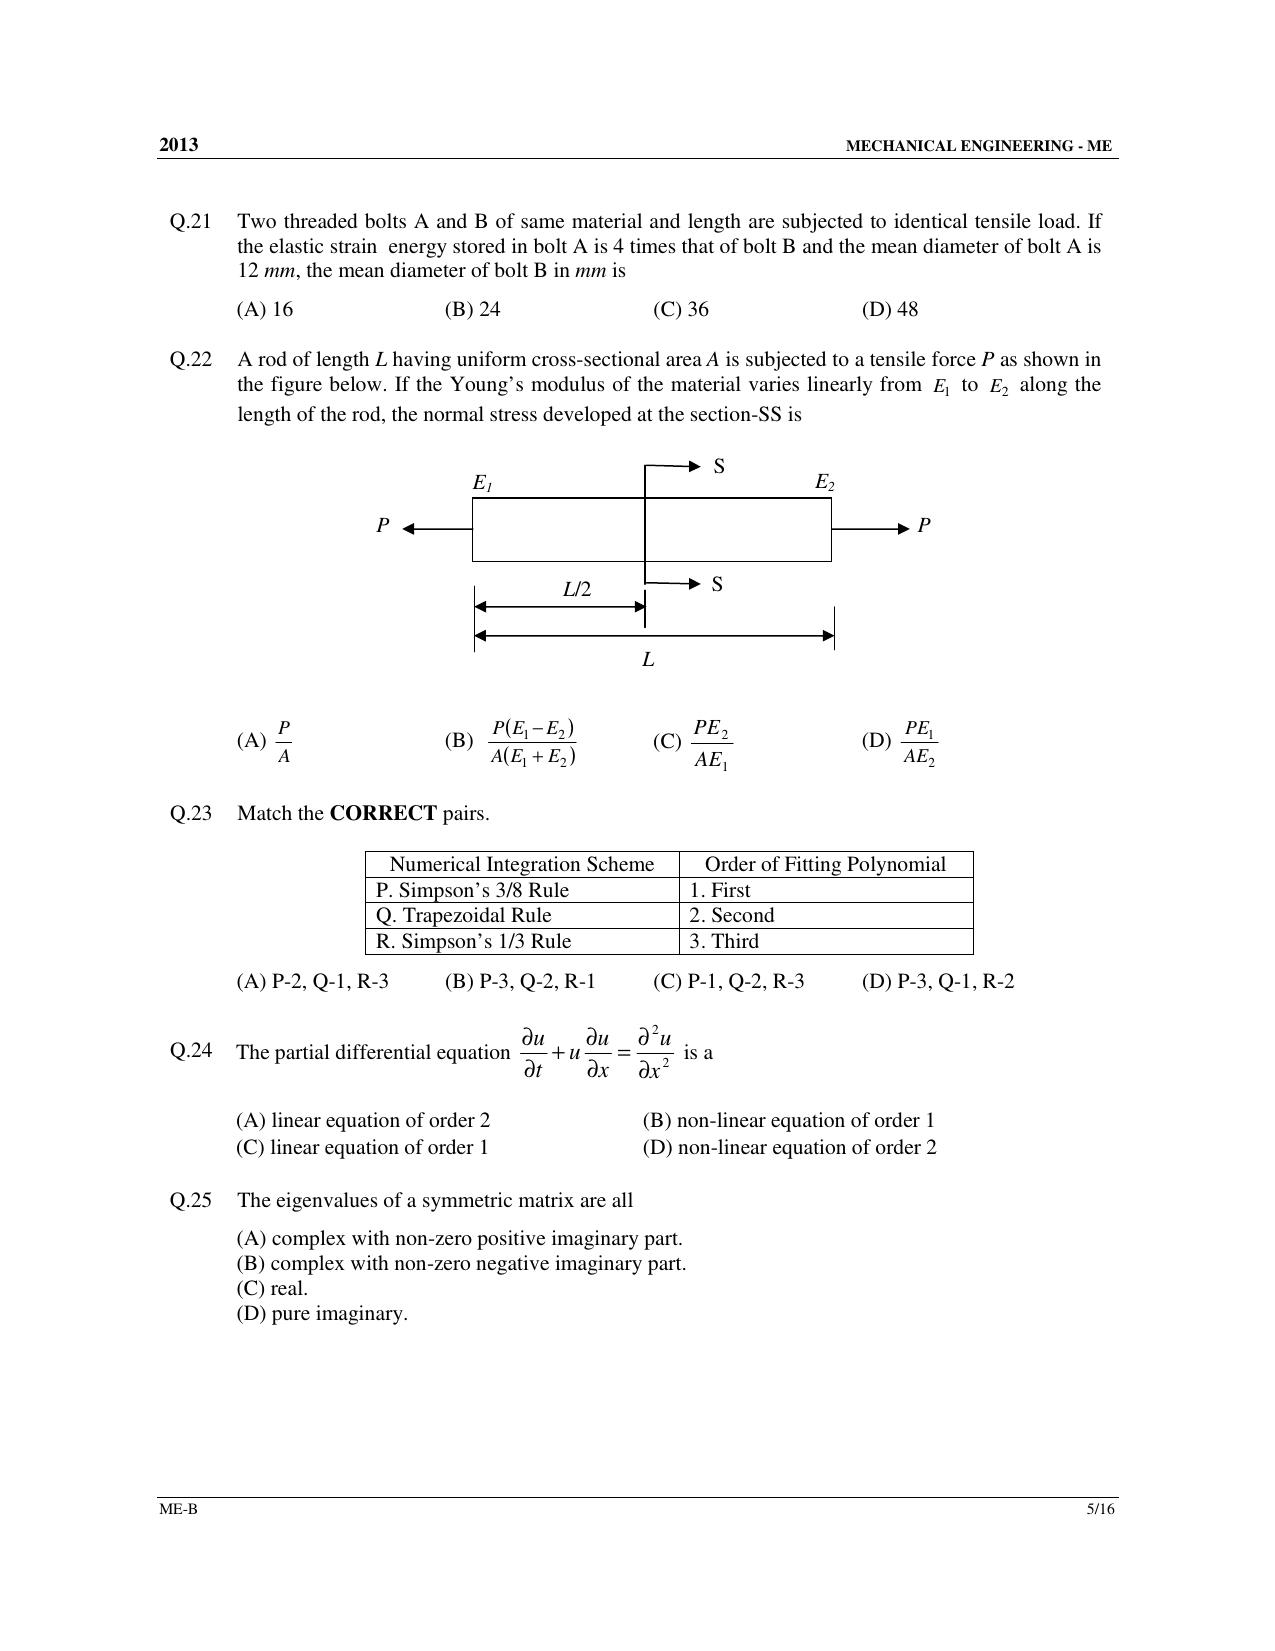 GATE 2013 Mechanical Engineering (ME) Question Paper with Answer Key - Page 20